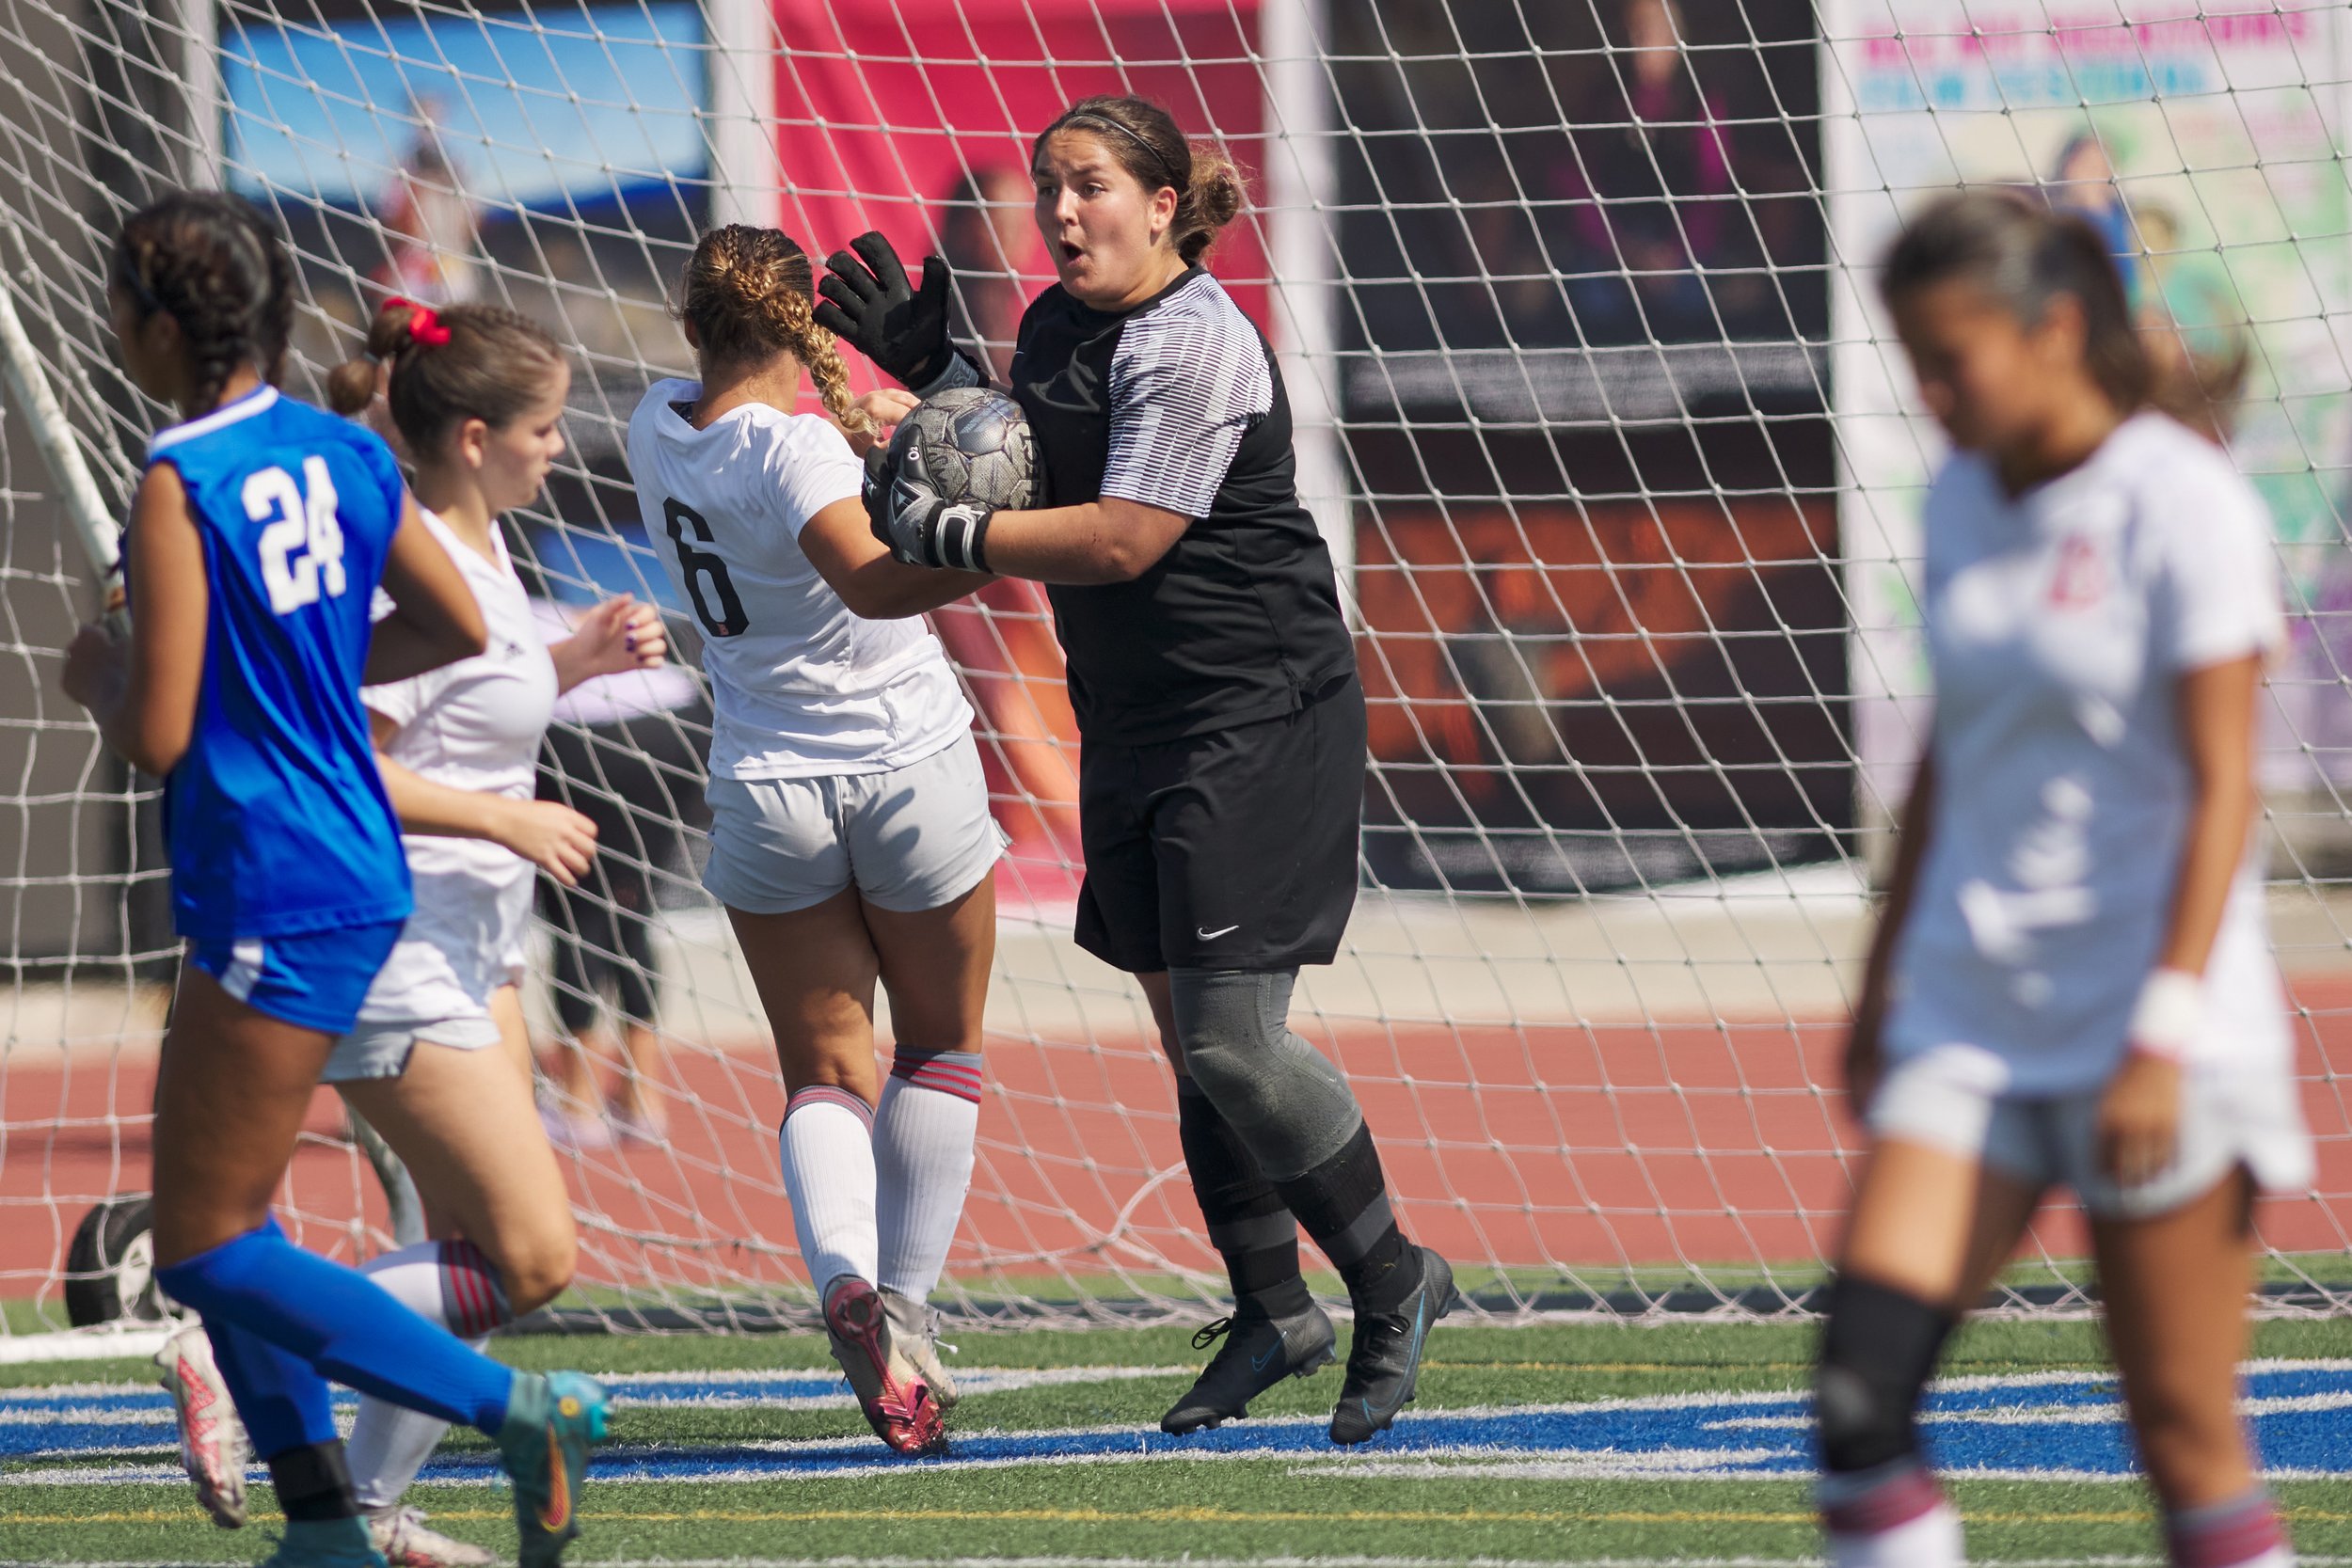  Santa Monica College Corsairs' Giorgia Sterza protects the goal during the women's soccer match against the Long Beach City College Vikings on Friday, Sept. 15, 2023, at Corsair Field in Santa Monica, Calif. The Corsairs tied 0-0. (Nicholas McCall |